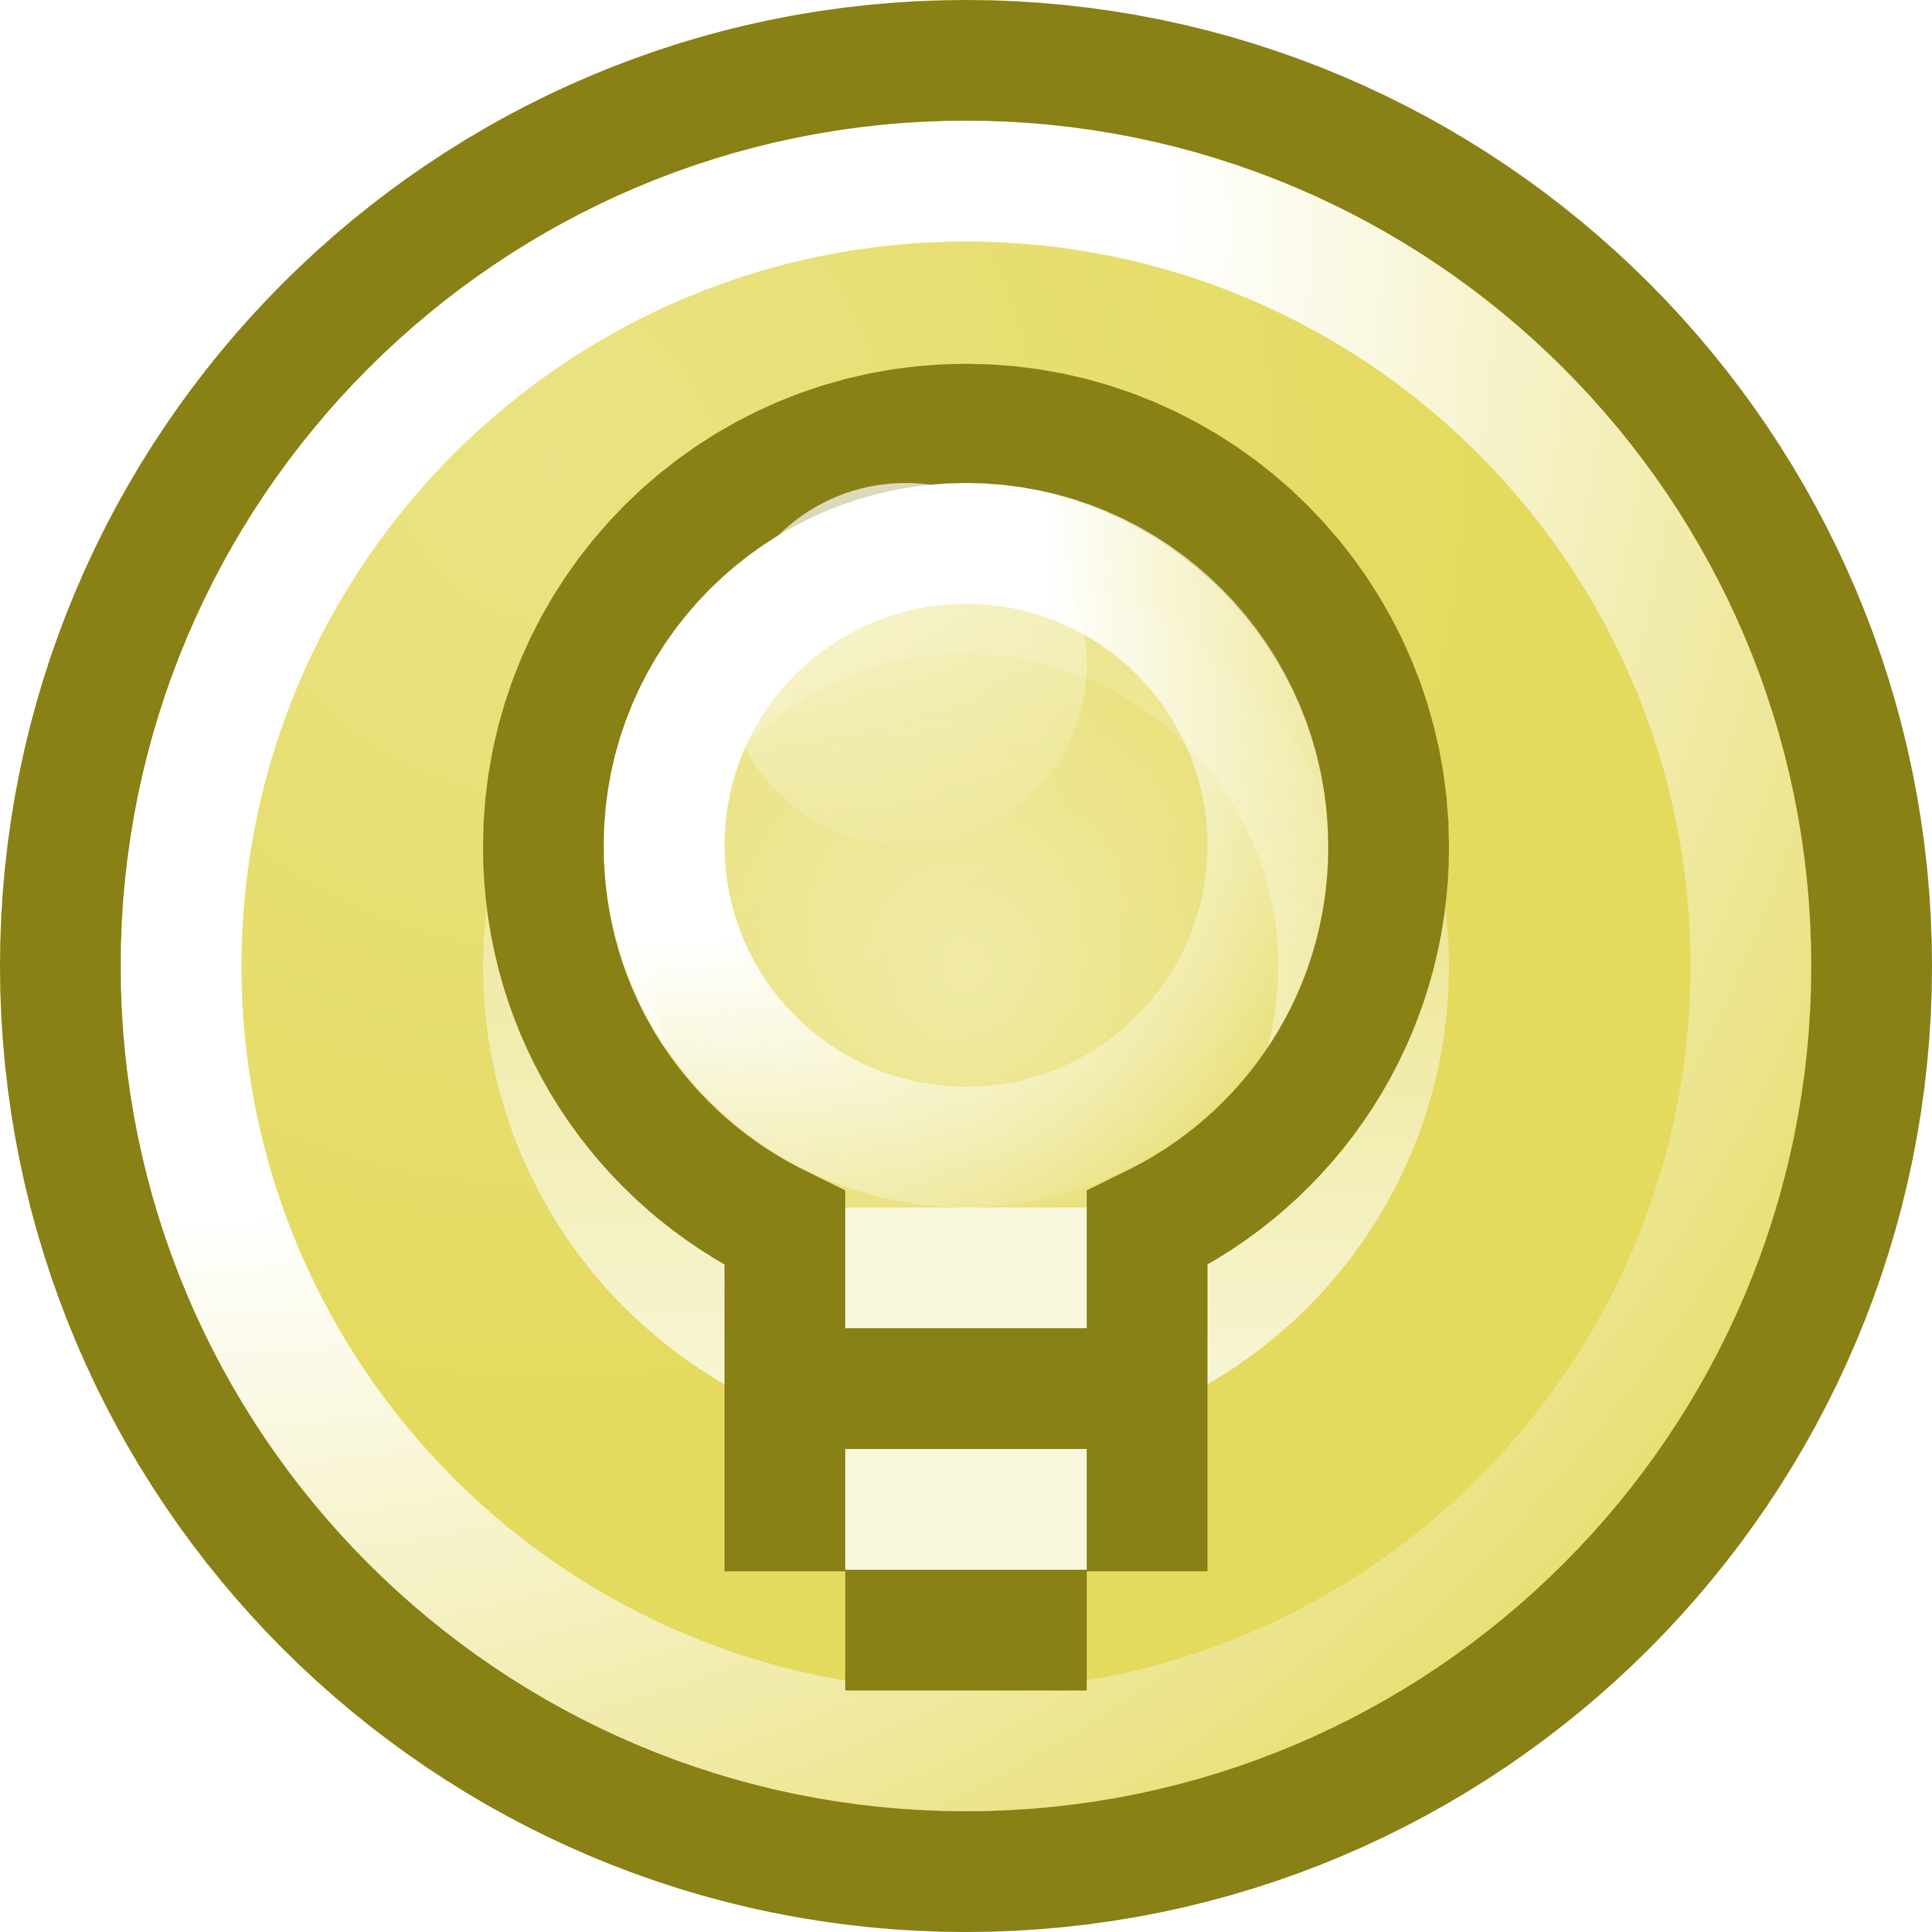 Free Vector Illustration Of A Light Bulb Icon - Light Bulb Vector Round Free (3200x3200)